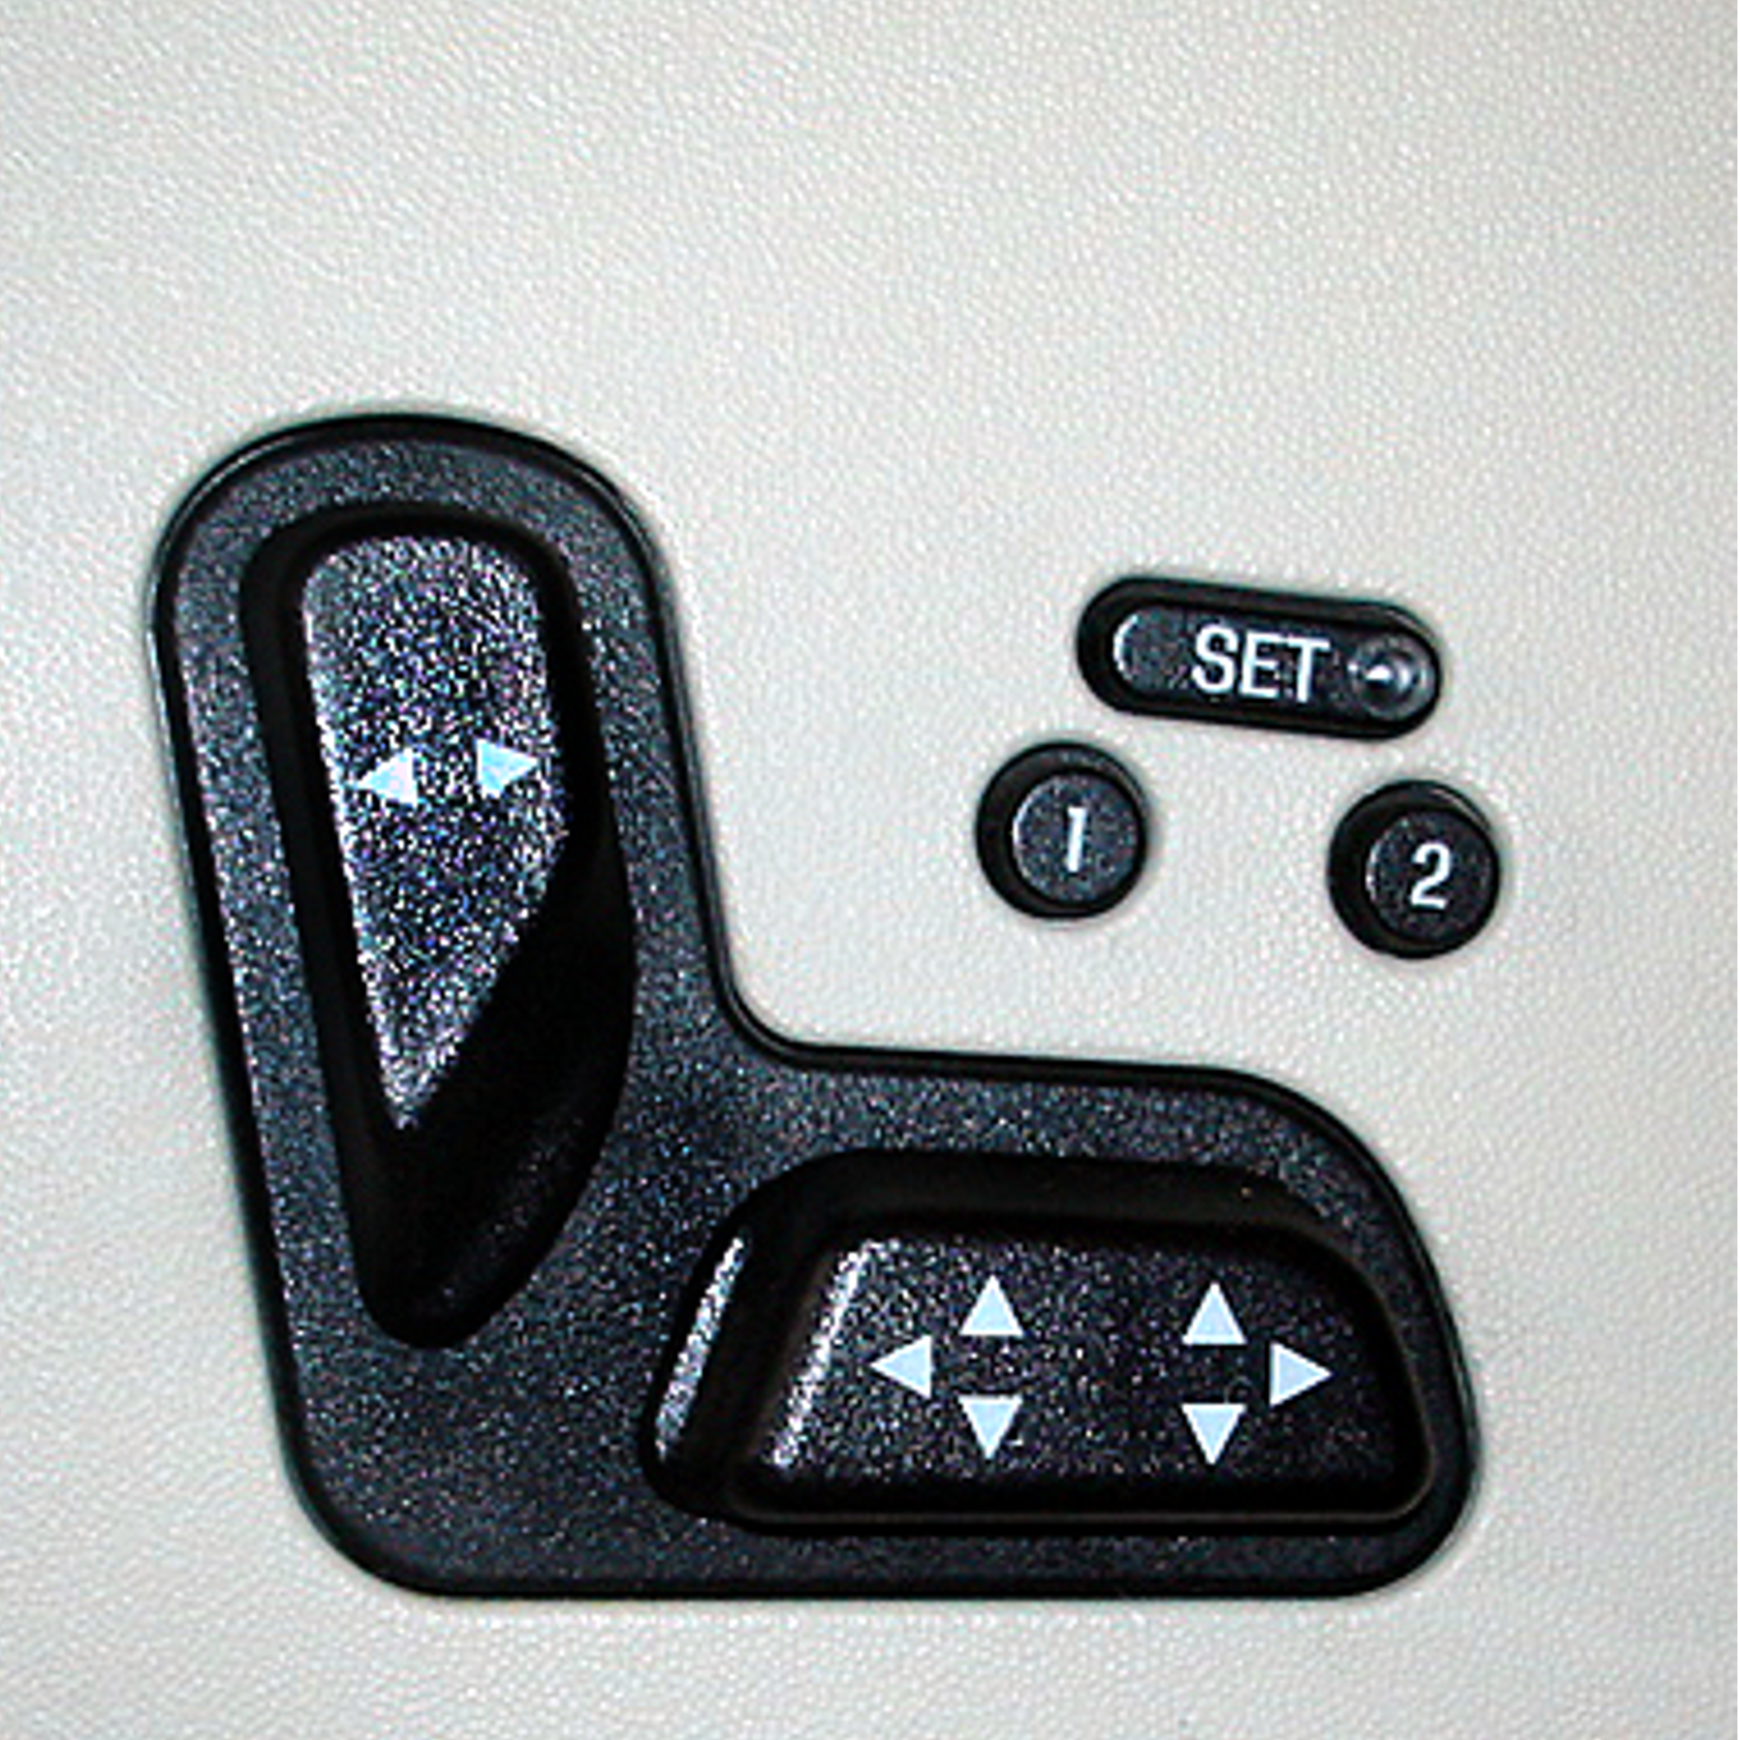 car power seat control buttons